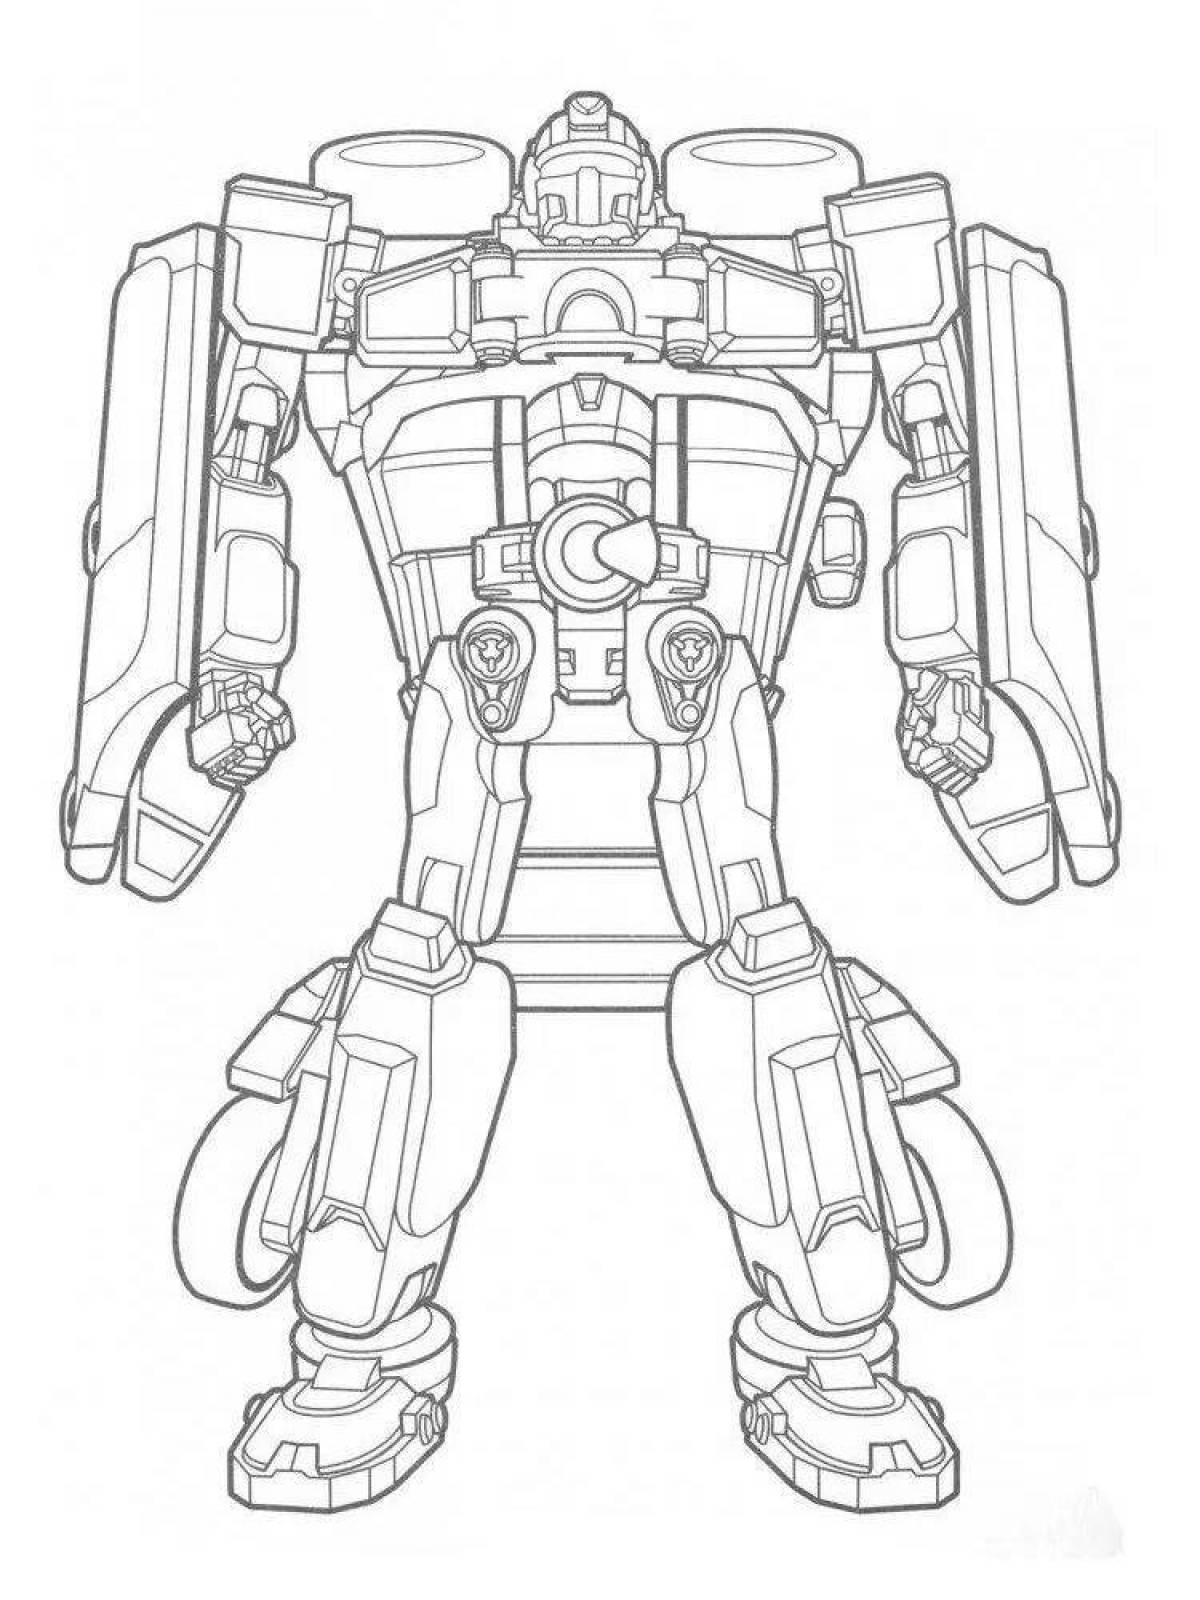 Coloring for bright tobots